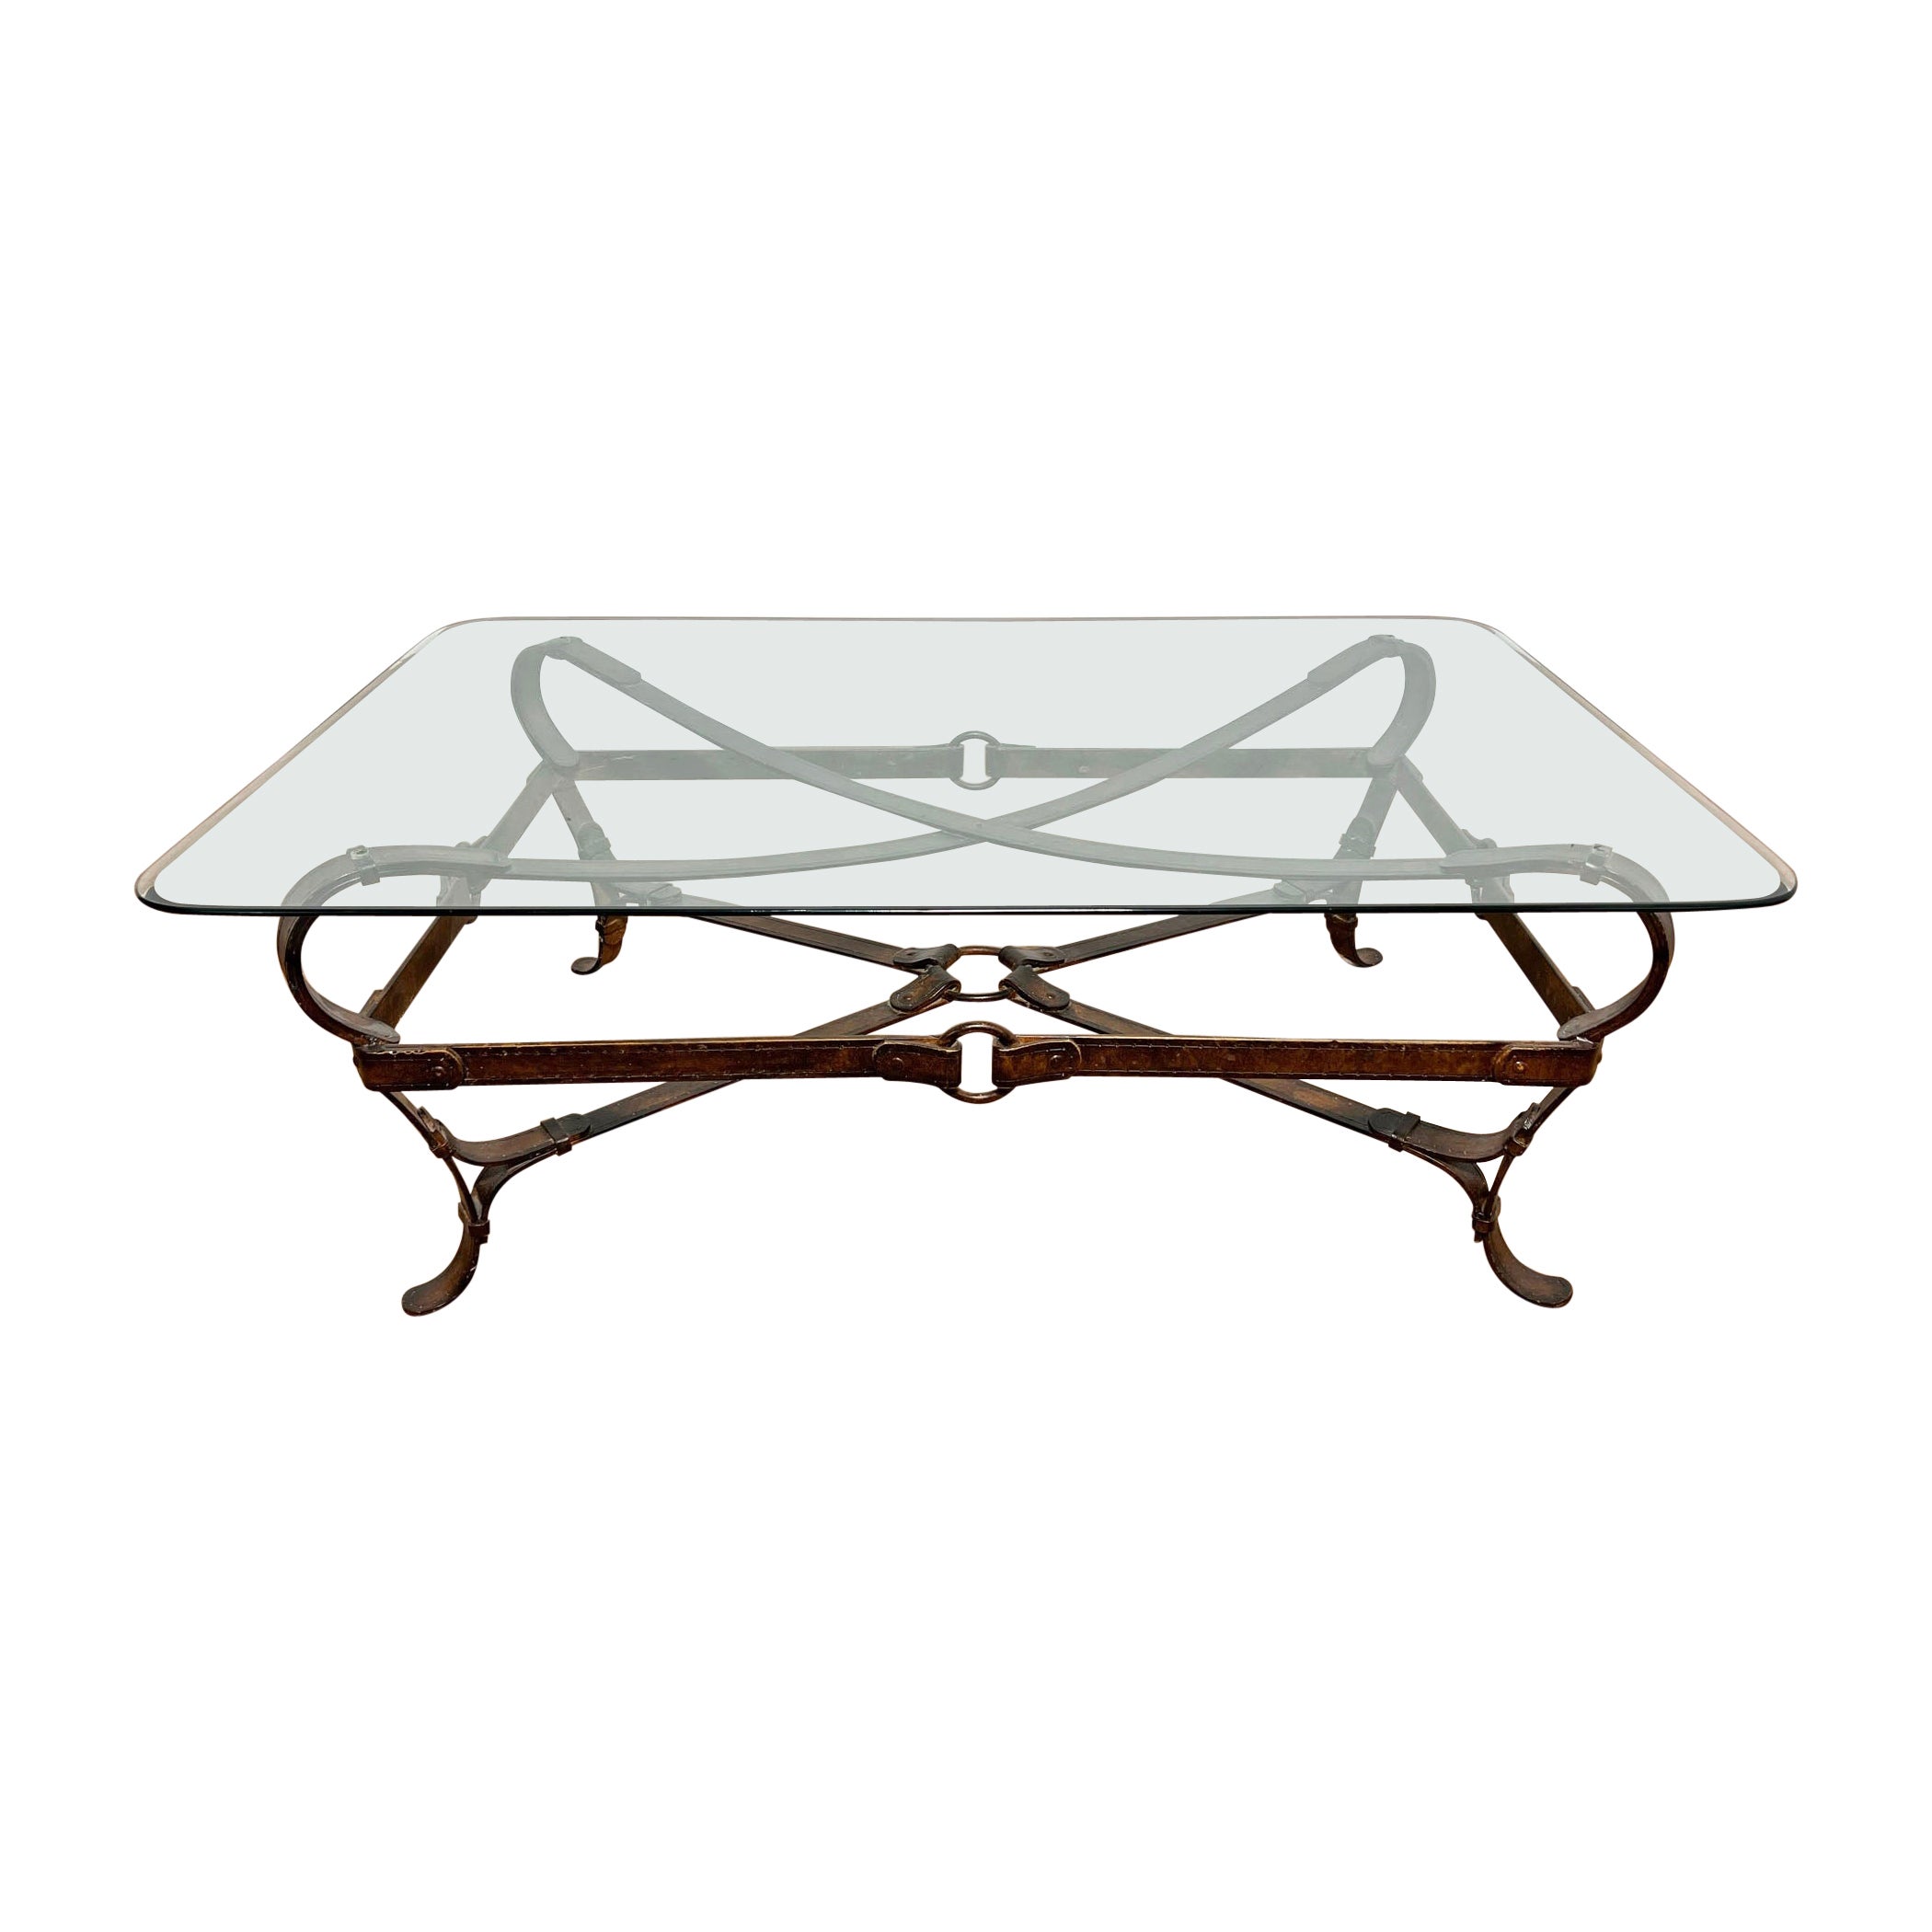 Jacques Adnet Hermes Style Tromp L'Oeil Equestrian Strap Coffee Table For Sale